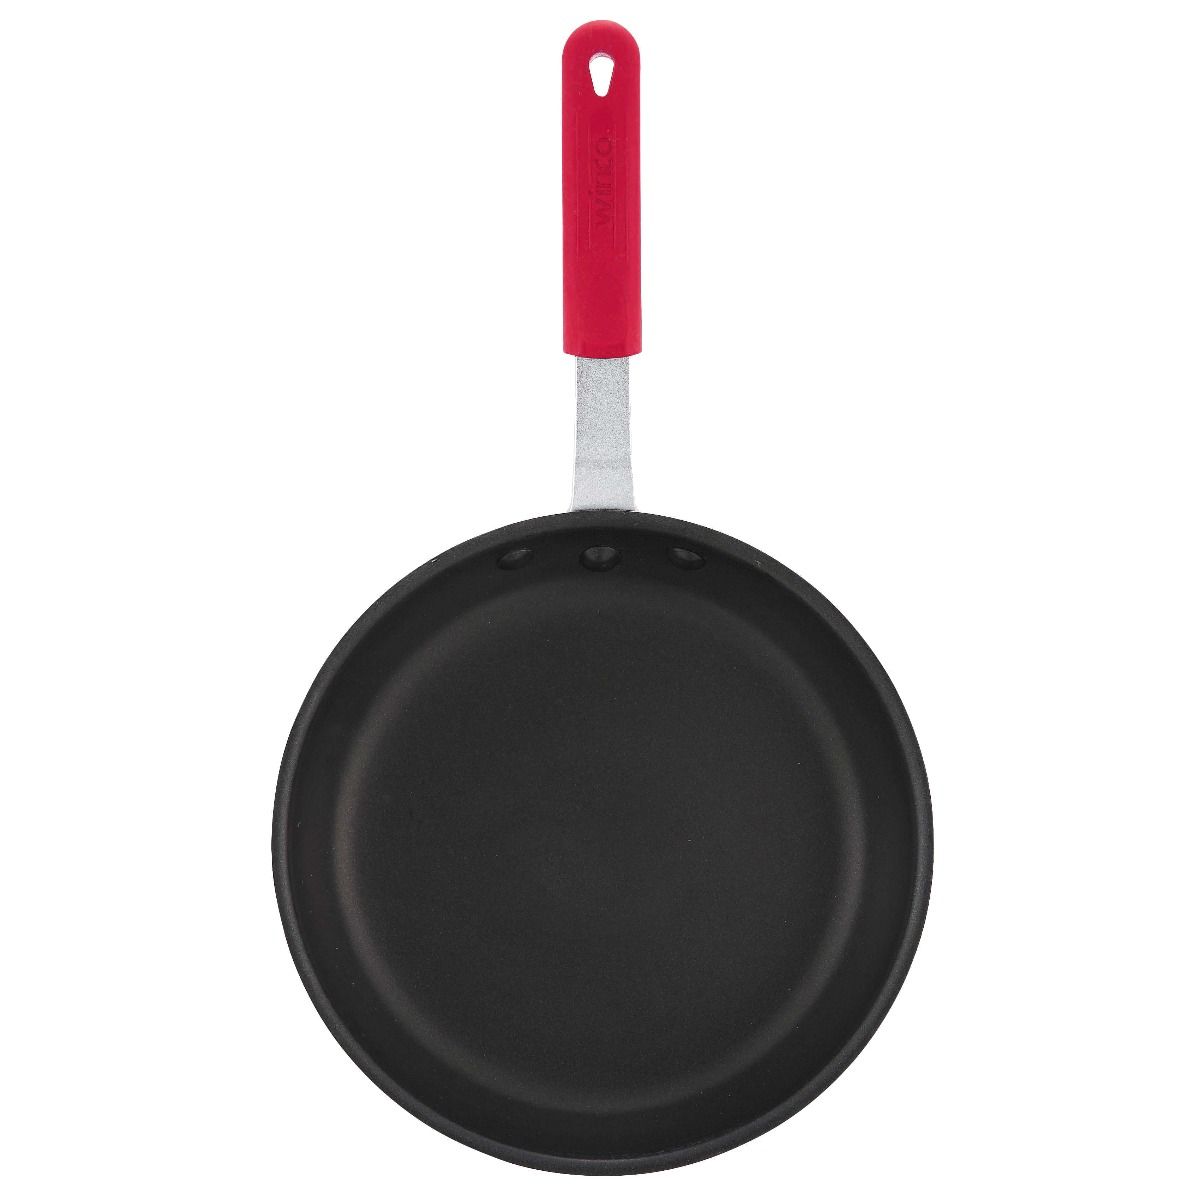 14-Inch Aluminum Non-Stick Fry Pan with Sleeve Winco AFP-14NS-H 